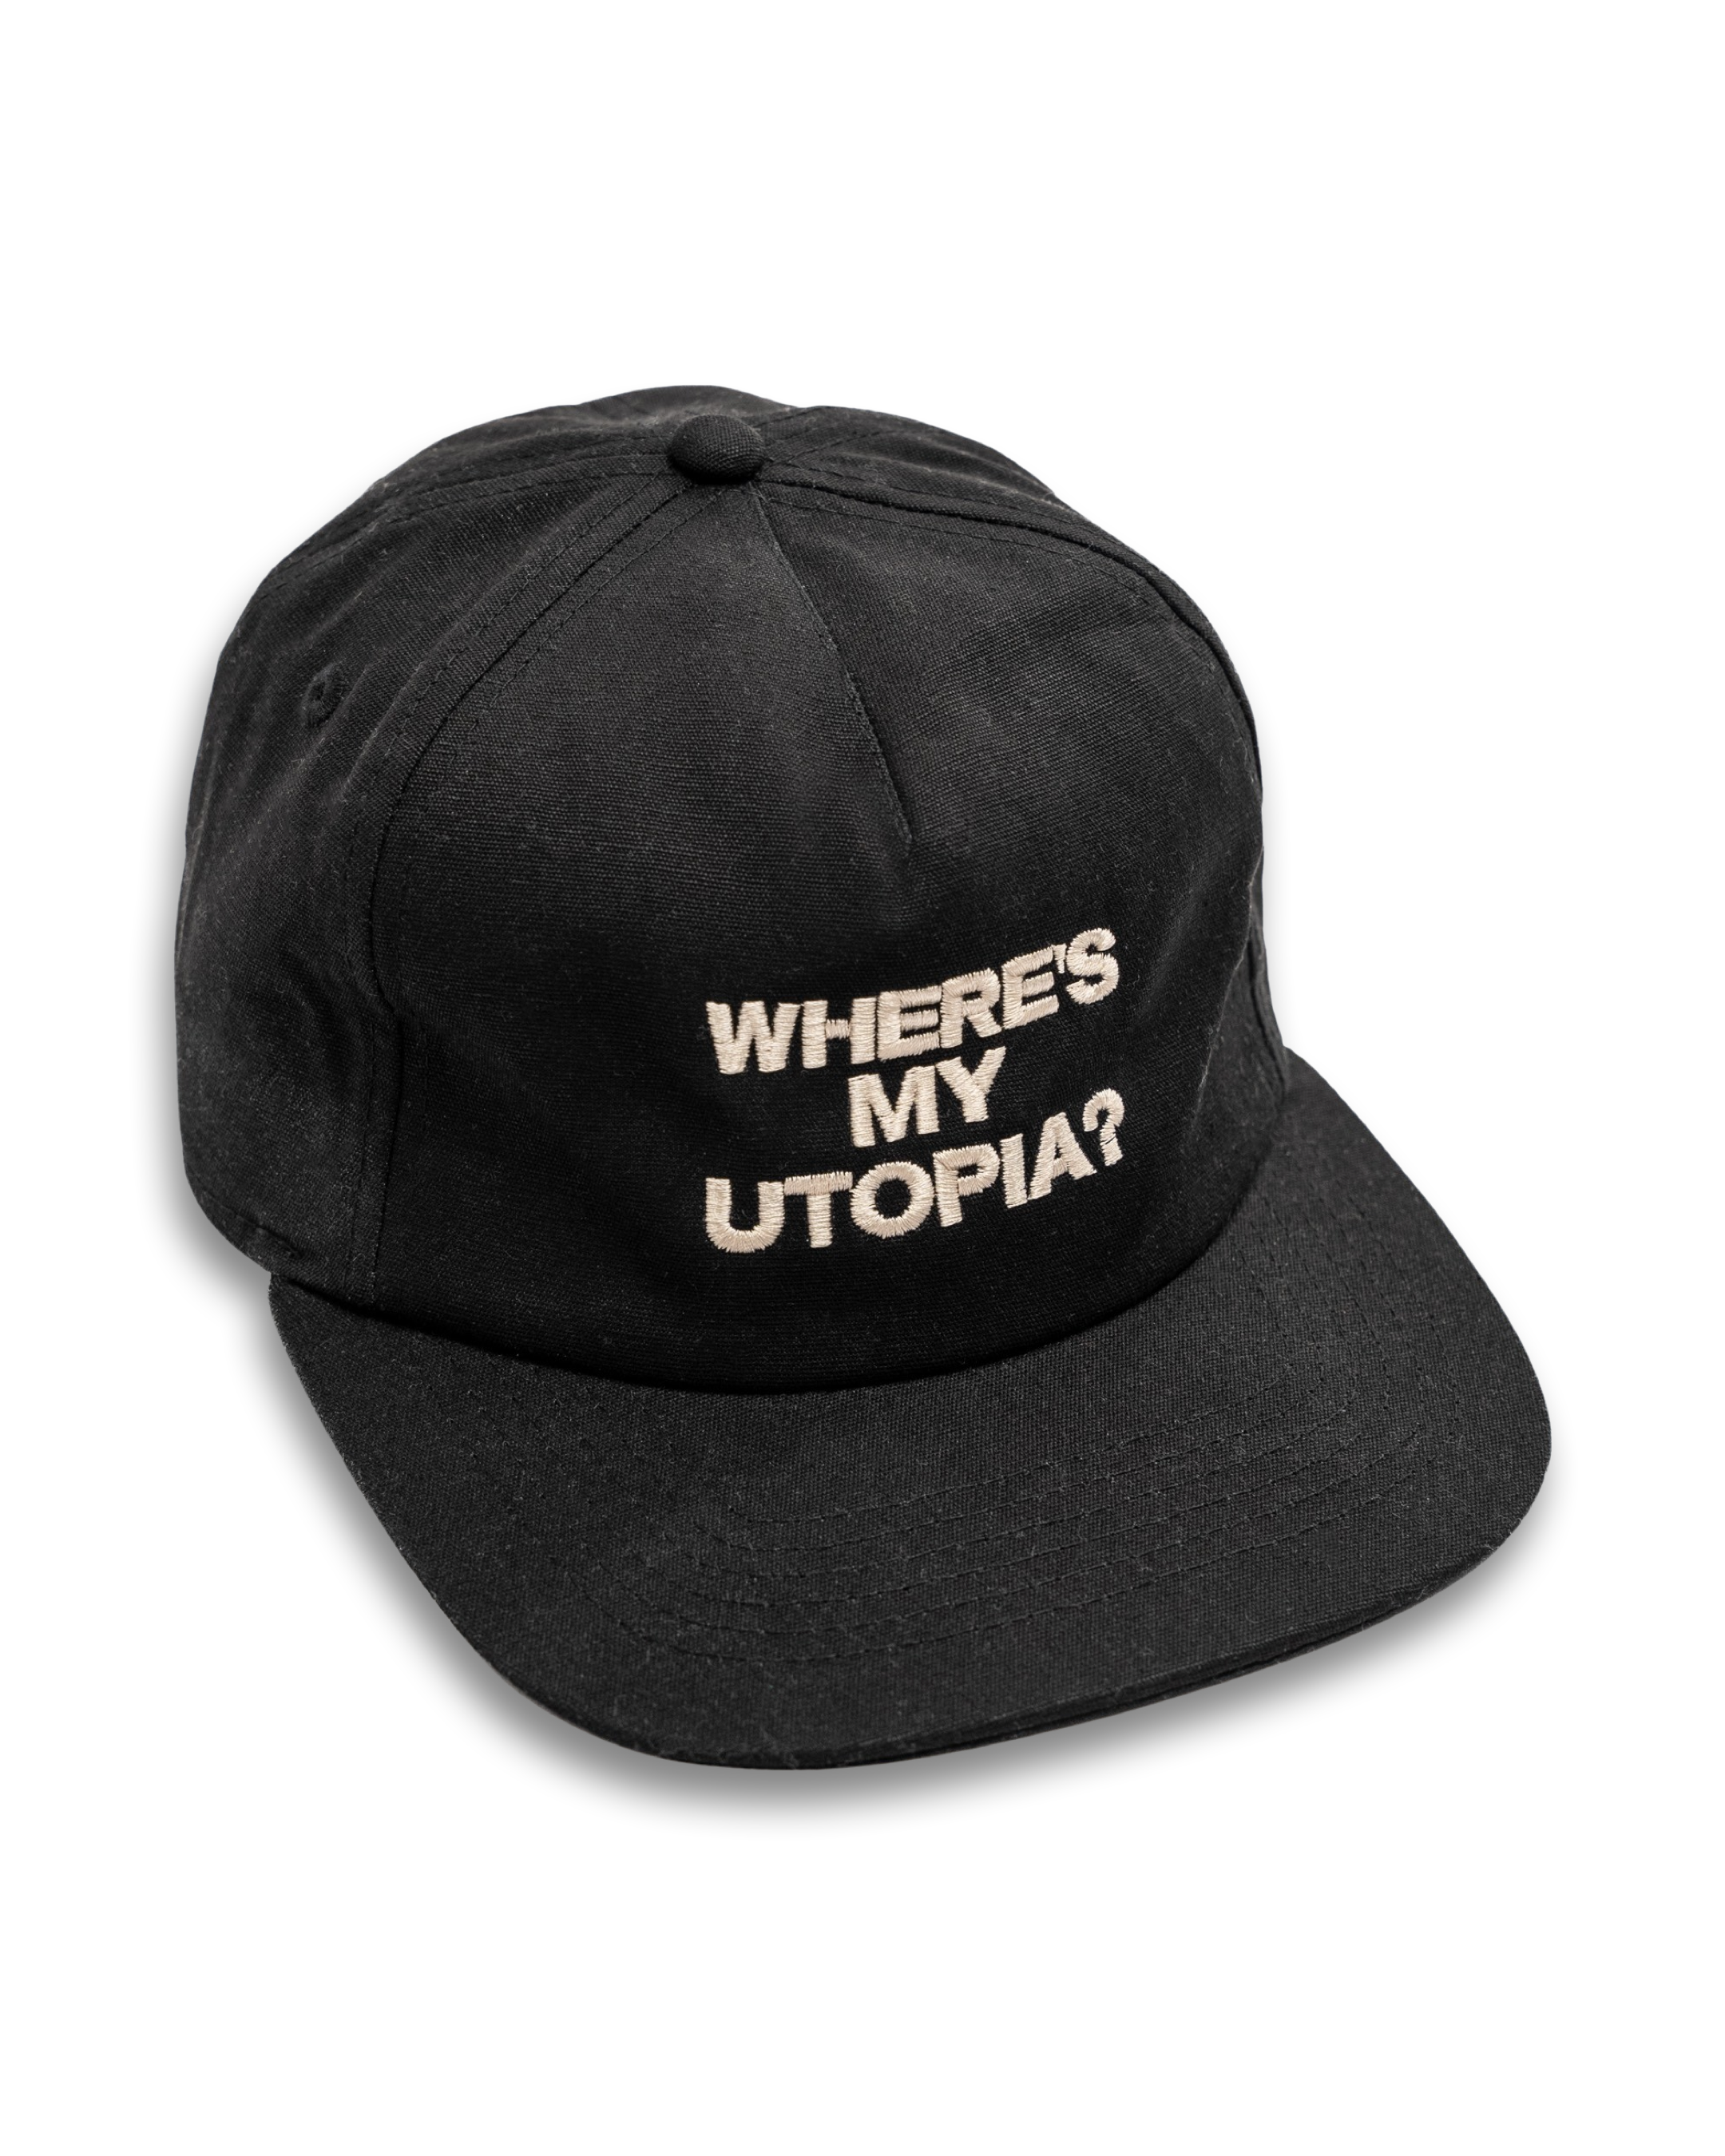 Yard Act - Where’s My Utopia?: Embroidered Cap